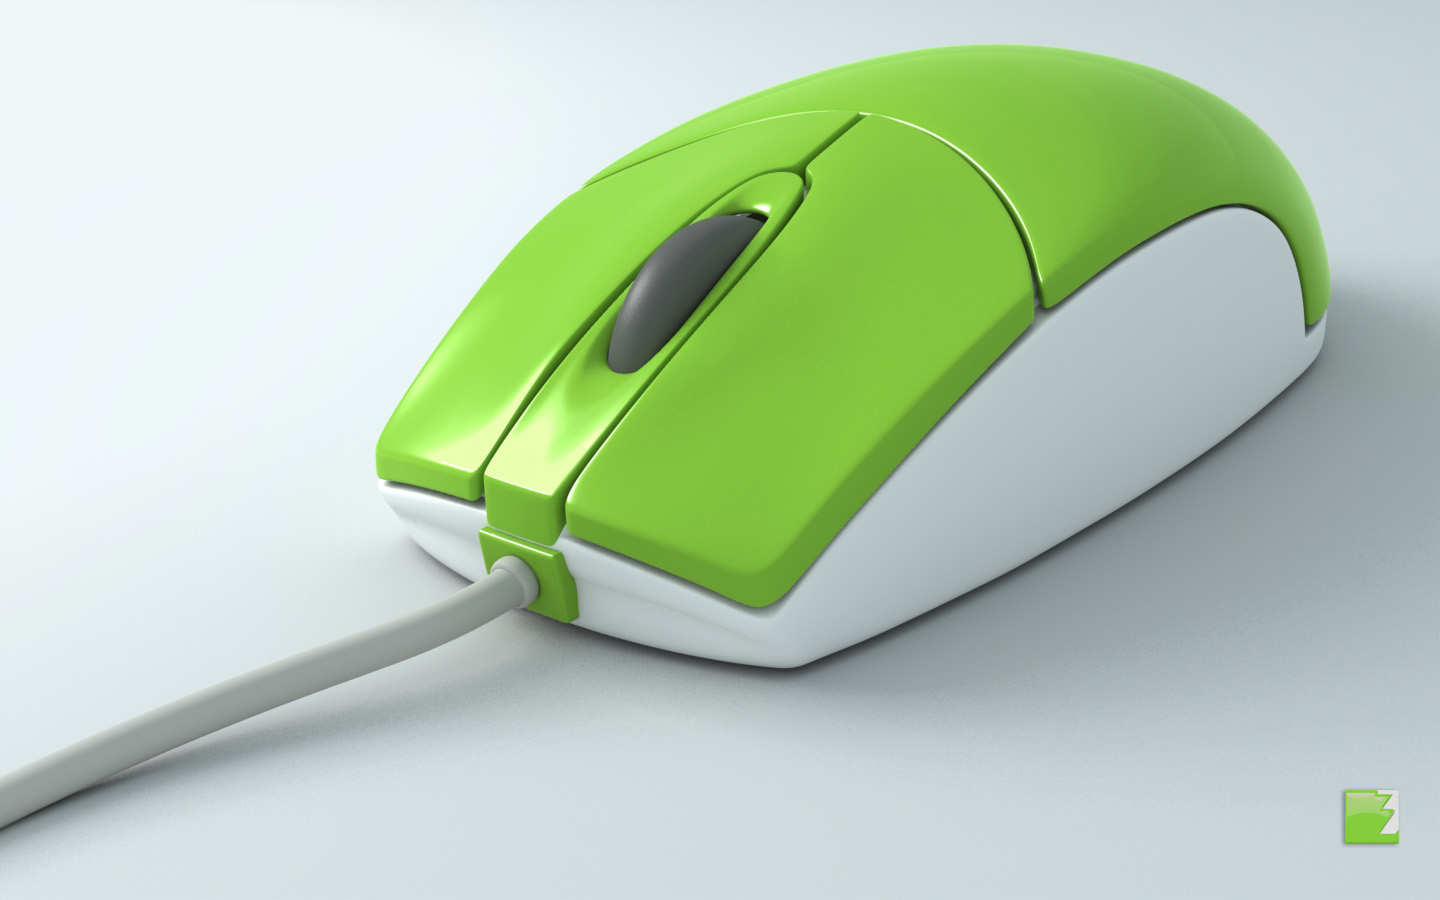 Pc Mouse Latest Wallpapers - Computer Mouse Pic Full Hd - 1440x900 Wallpaper  